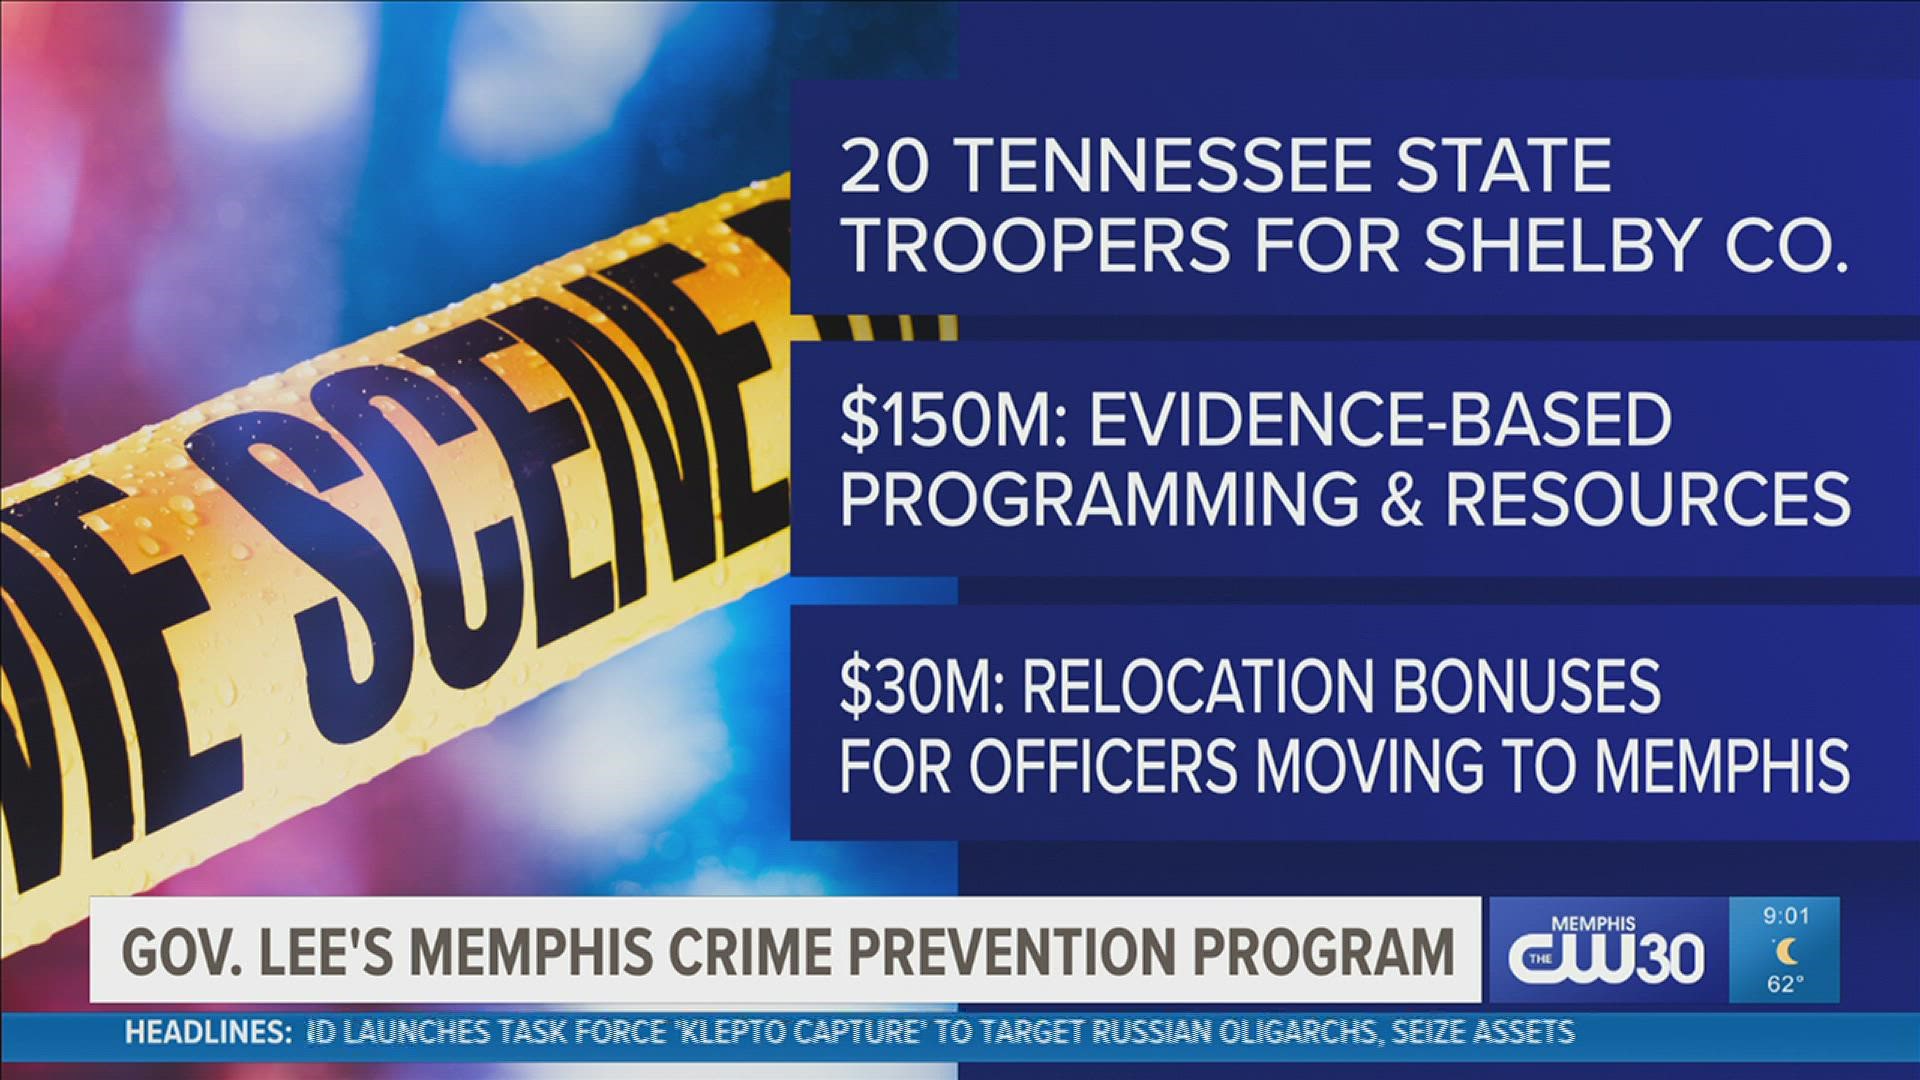 11 troopers took state pitch to move to Tennessee 